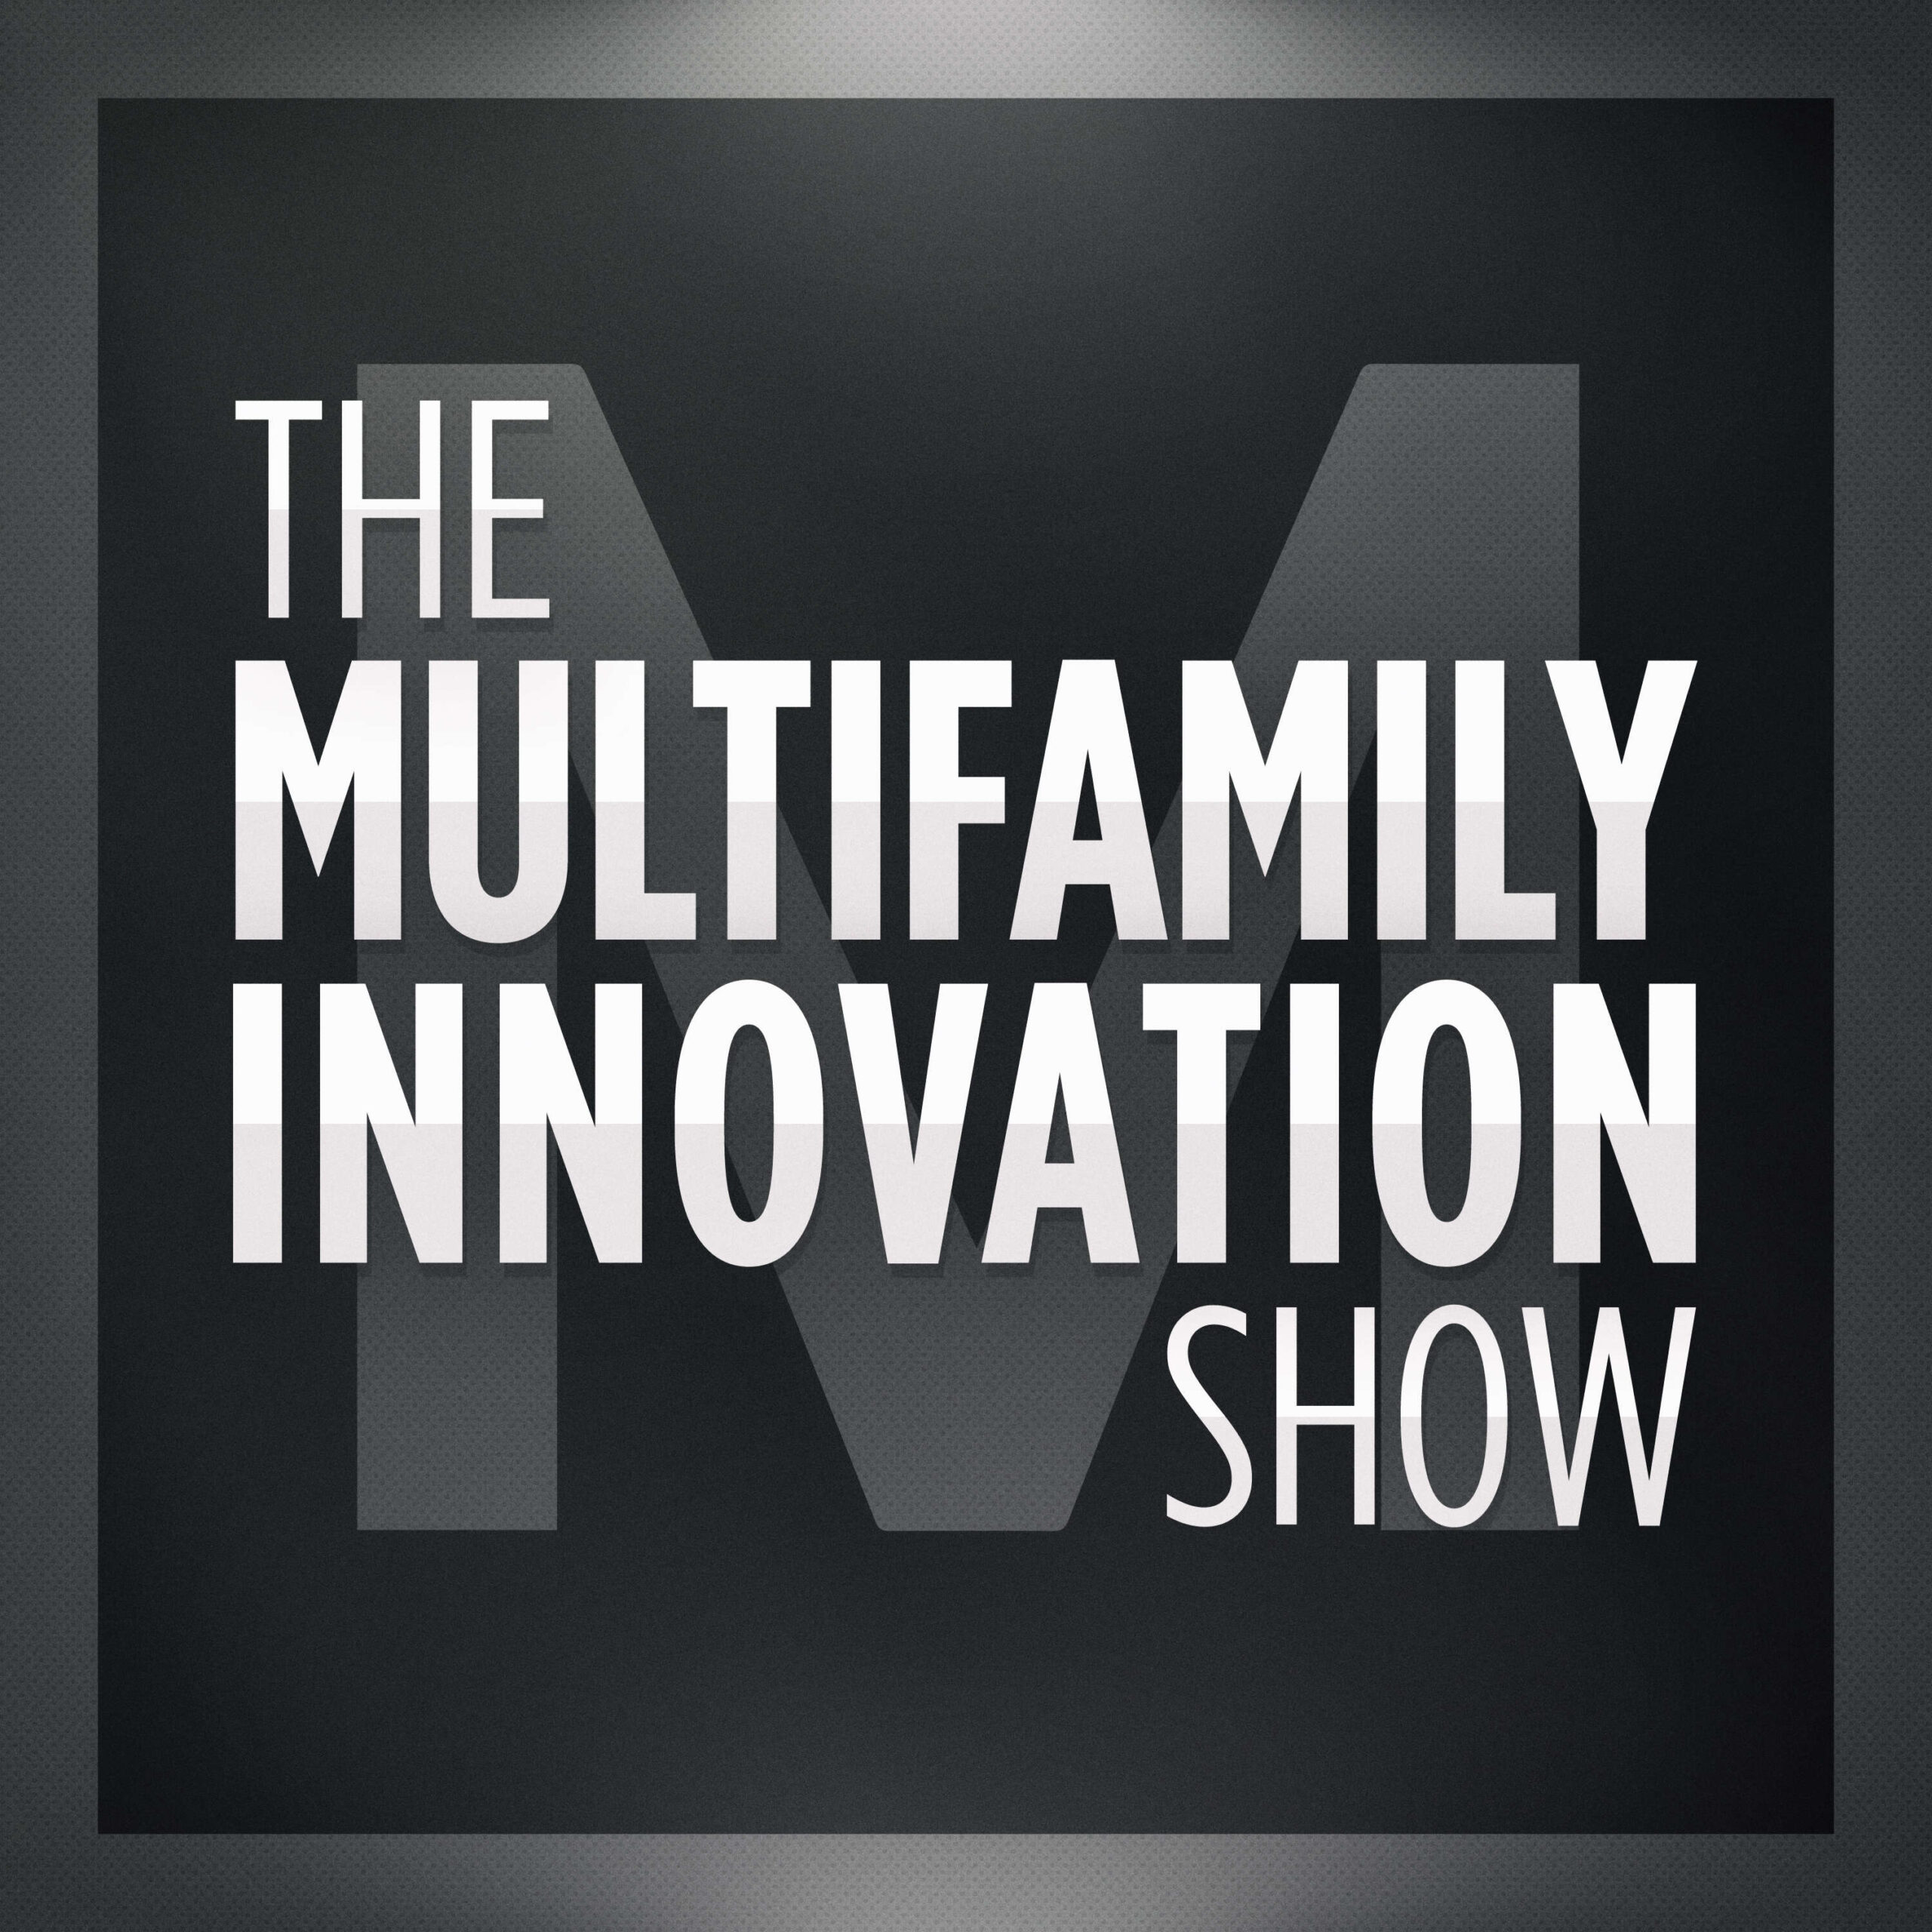 Technology is Changing the Way We Work in Multifamily